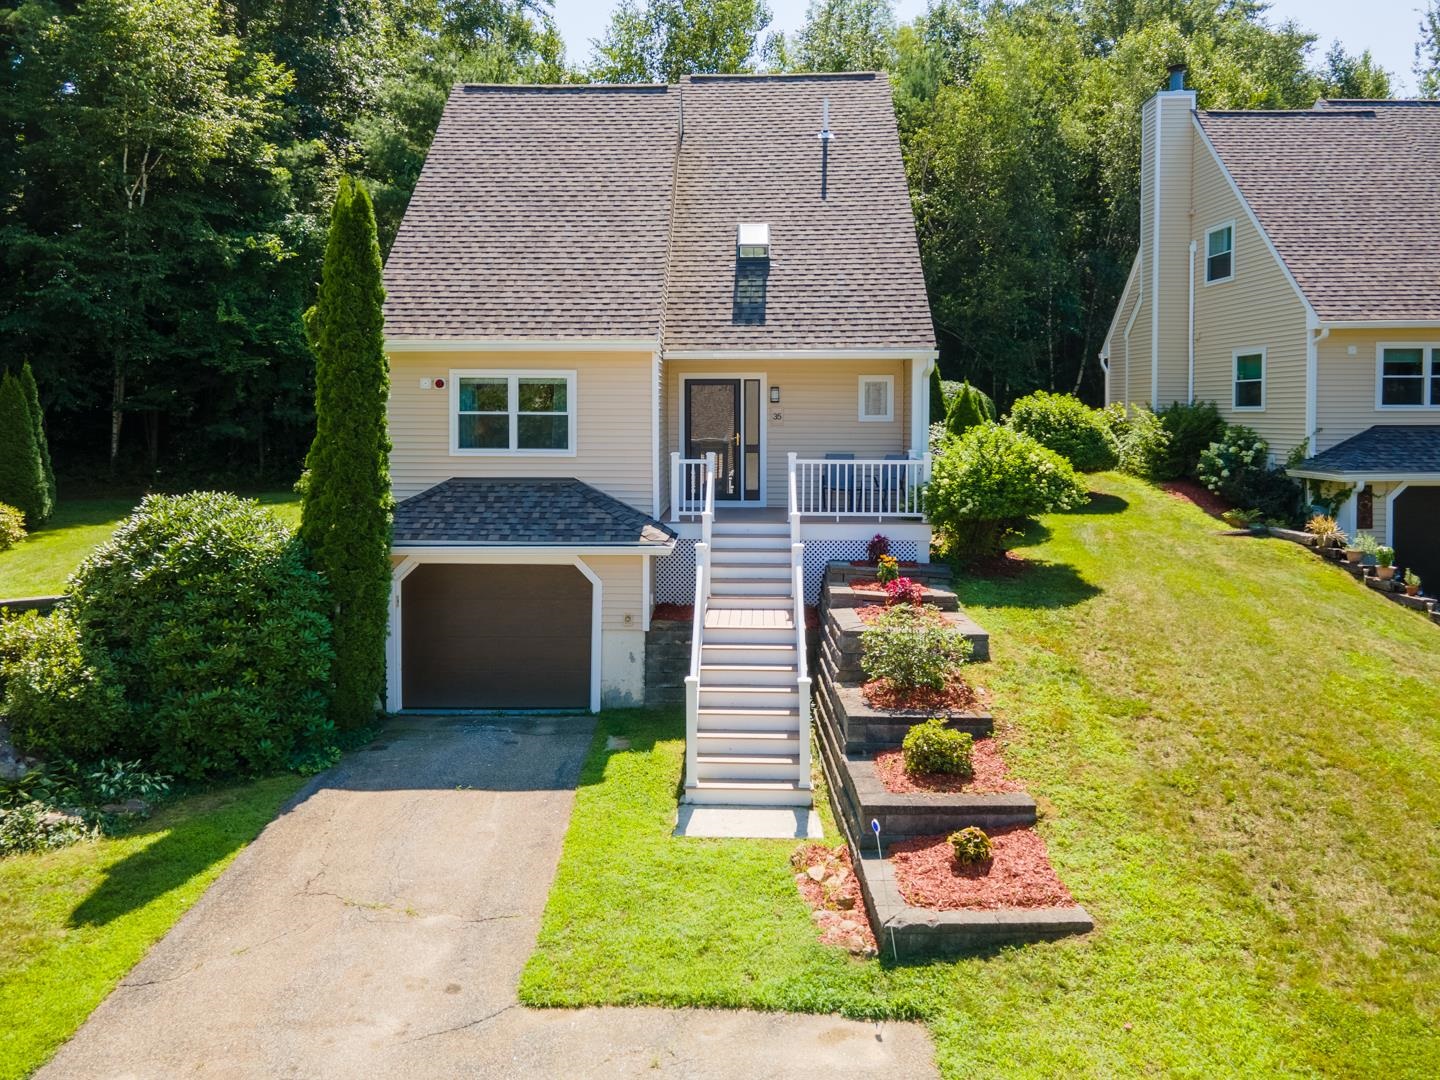 35 Starboard Way, Laconia, NH 03246